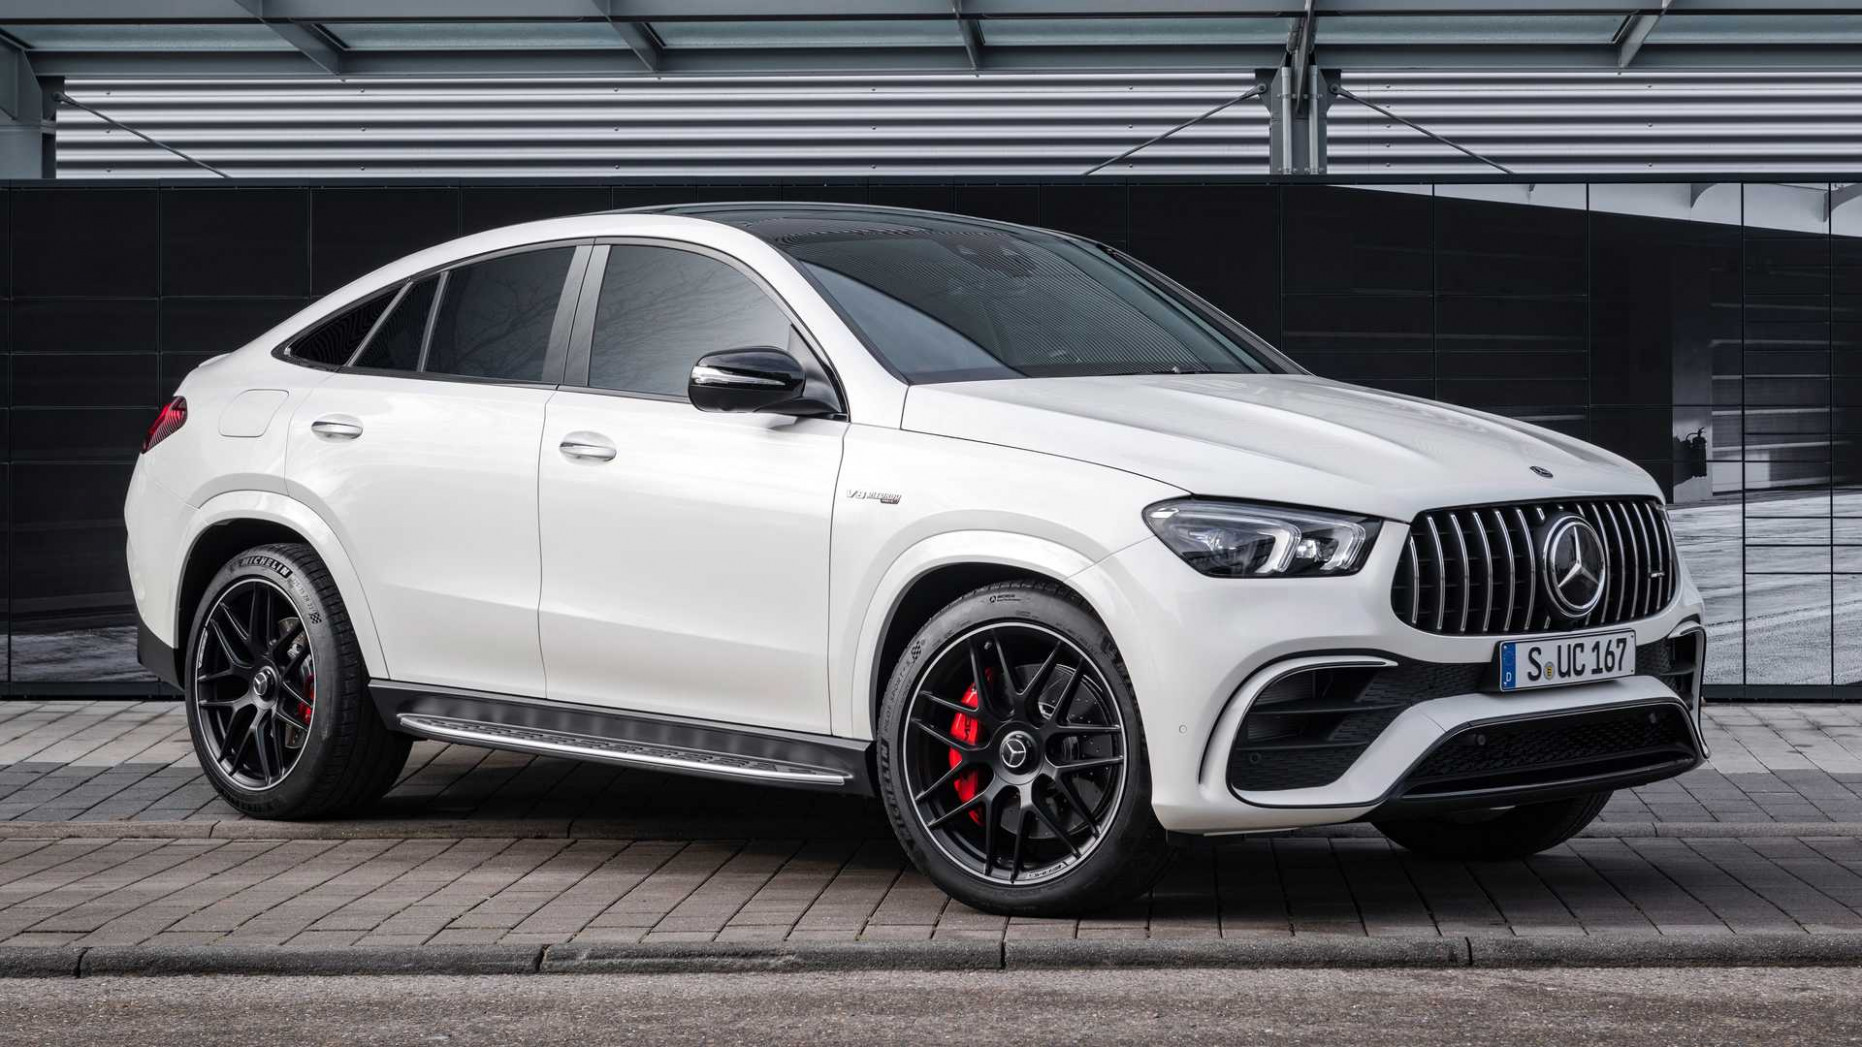 3 Mercedes Amg Gle3 S Coupe Starts At $3,3 Mercedes Gle Amg Price